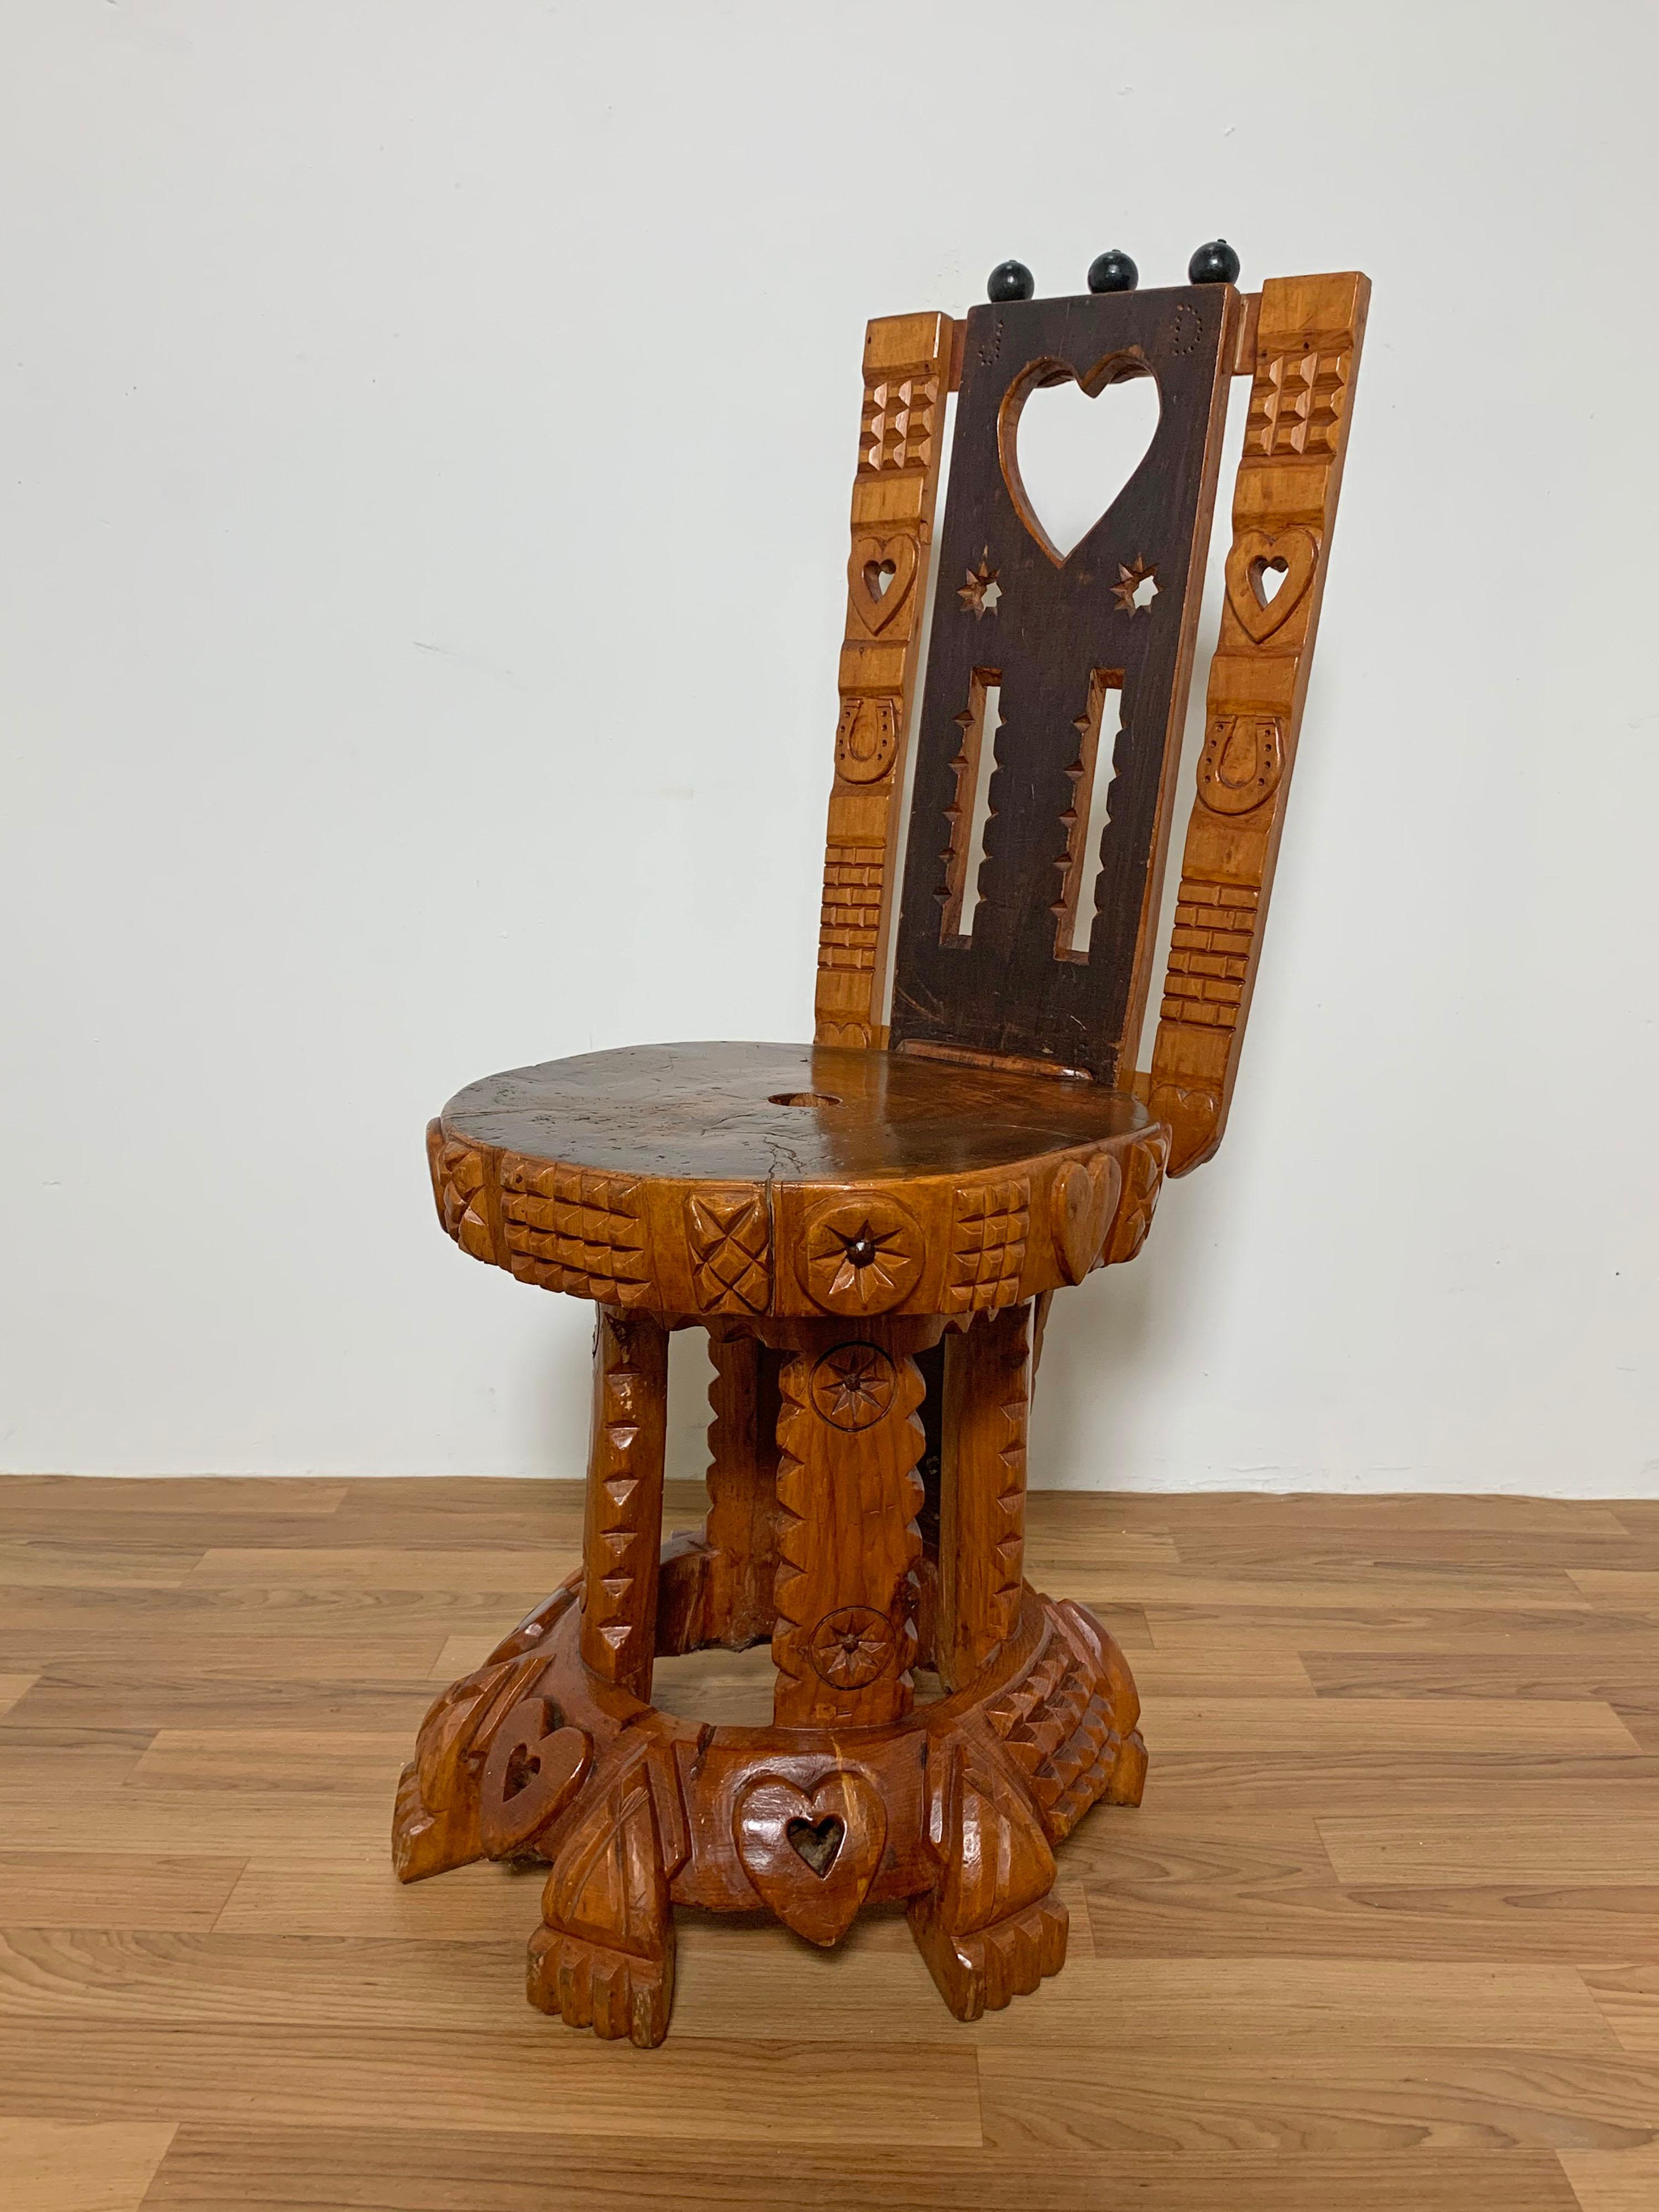 Hand Carved Folk Art Chairs by Joseph Deveau, Circa 1950s For Sale 6